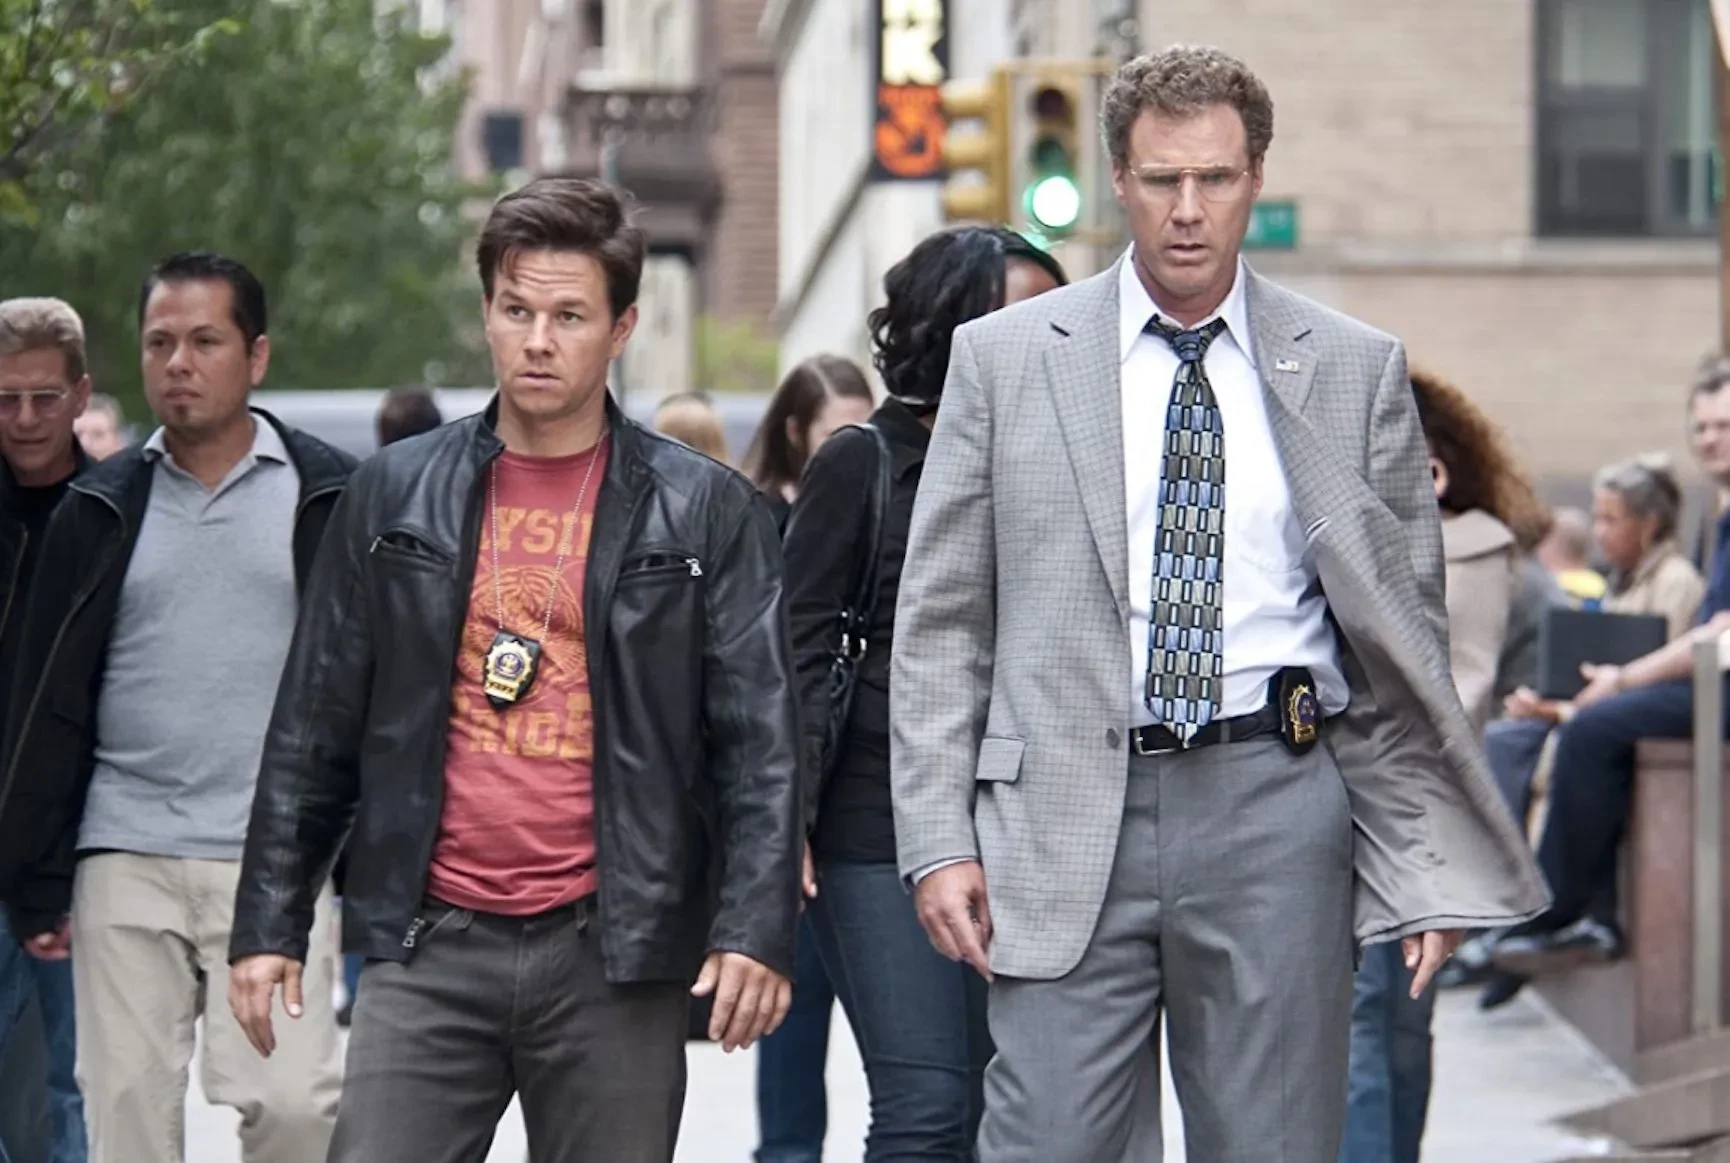 The Other Guys - Movies like 21 Jump Street